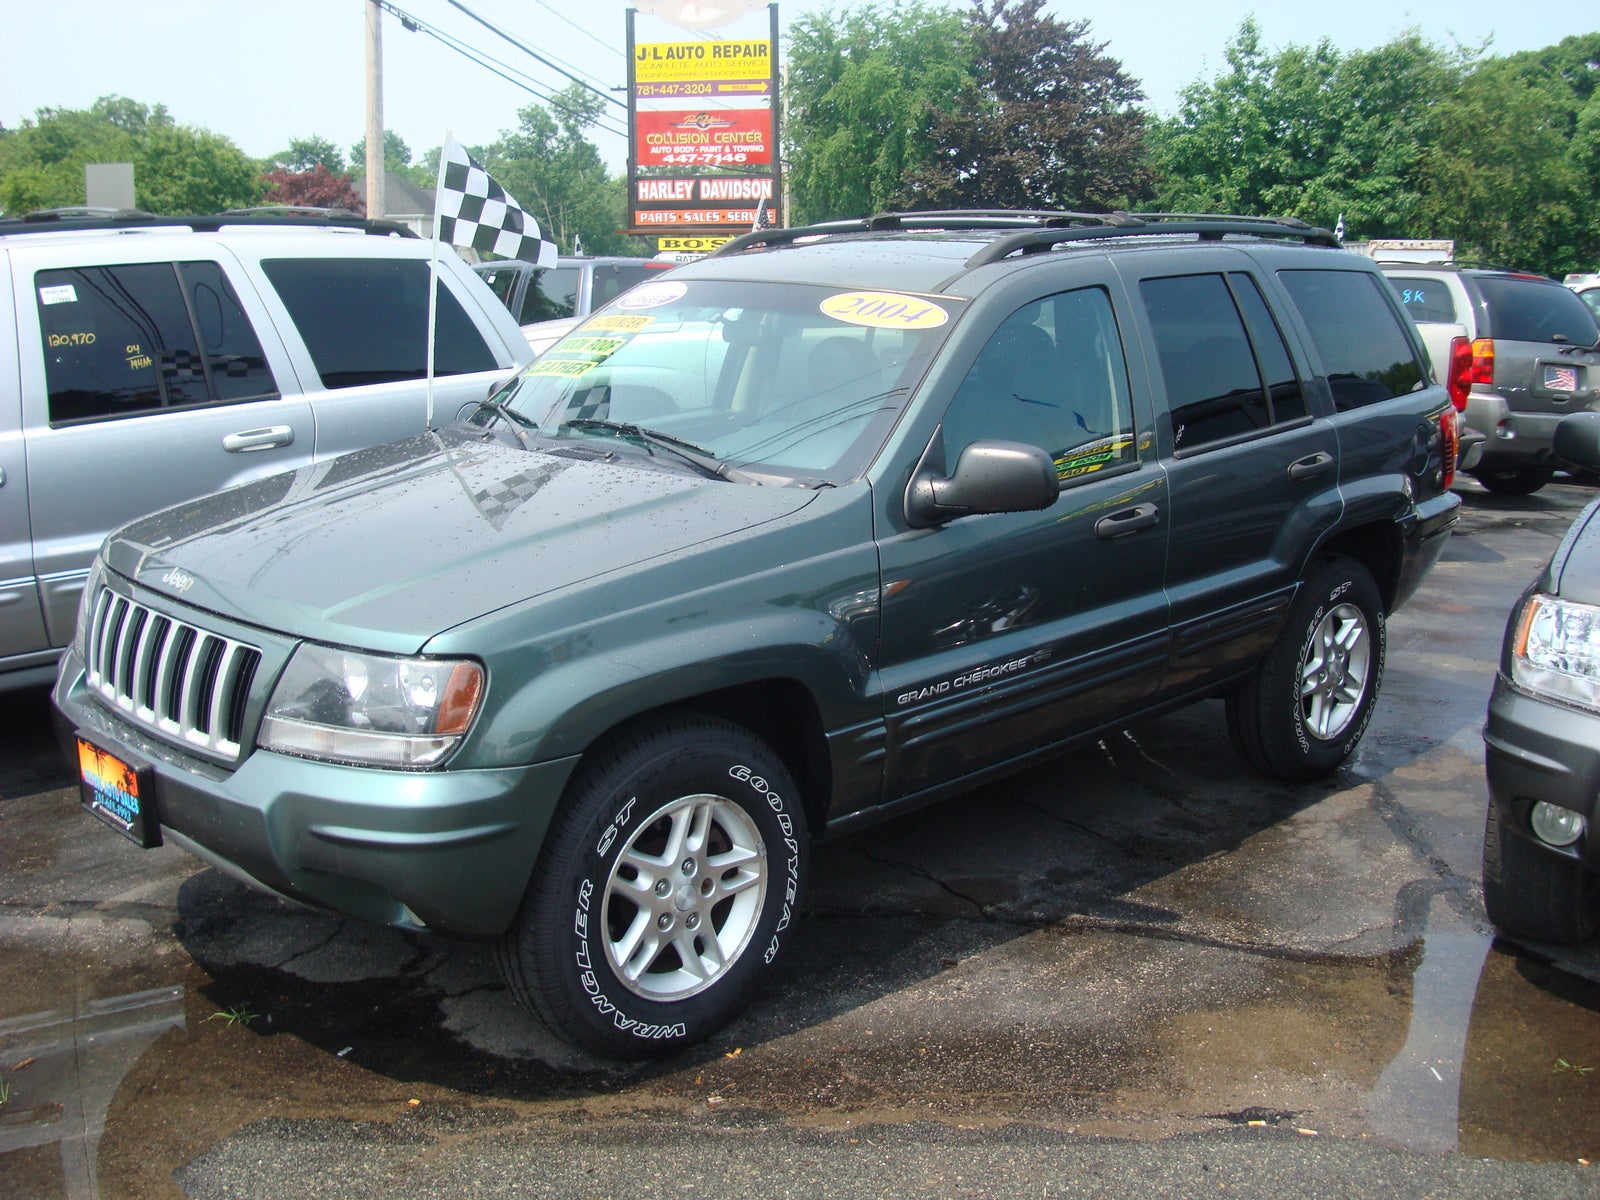 2004 Jeep Grand Cherokee Special Edition download free